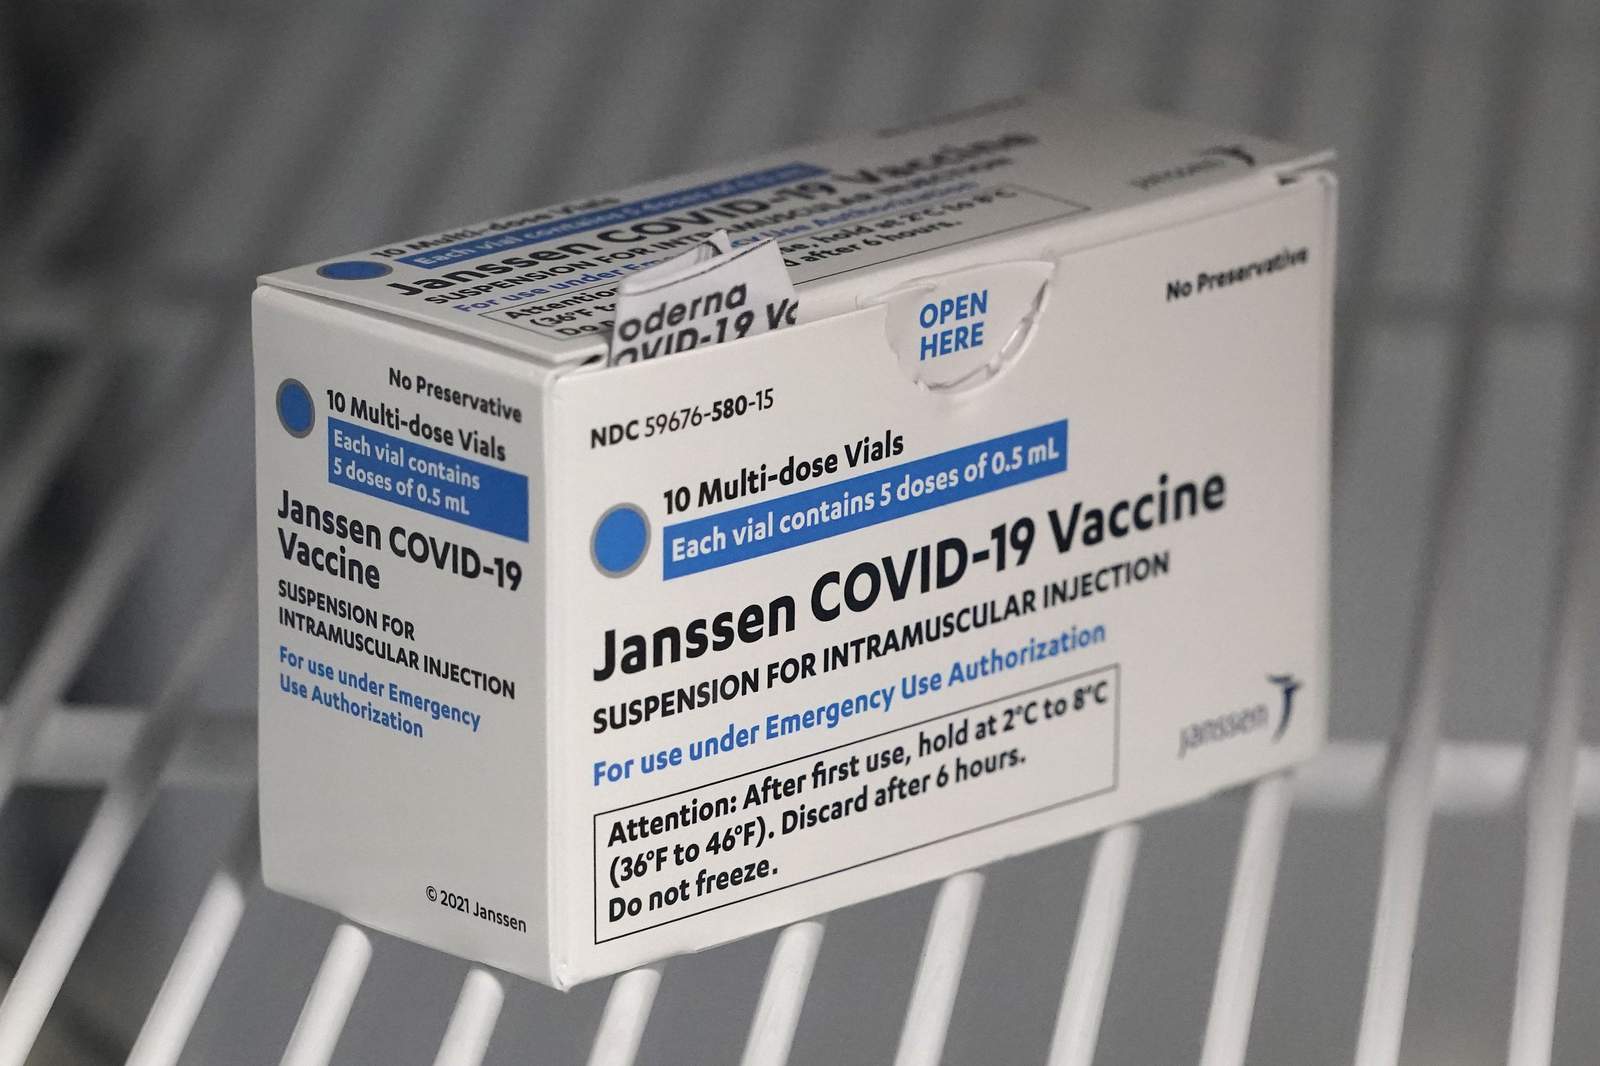 Oakland County COVID vaccine: 5,000 Johnson & Johnson doses set aside for ages 18-24